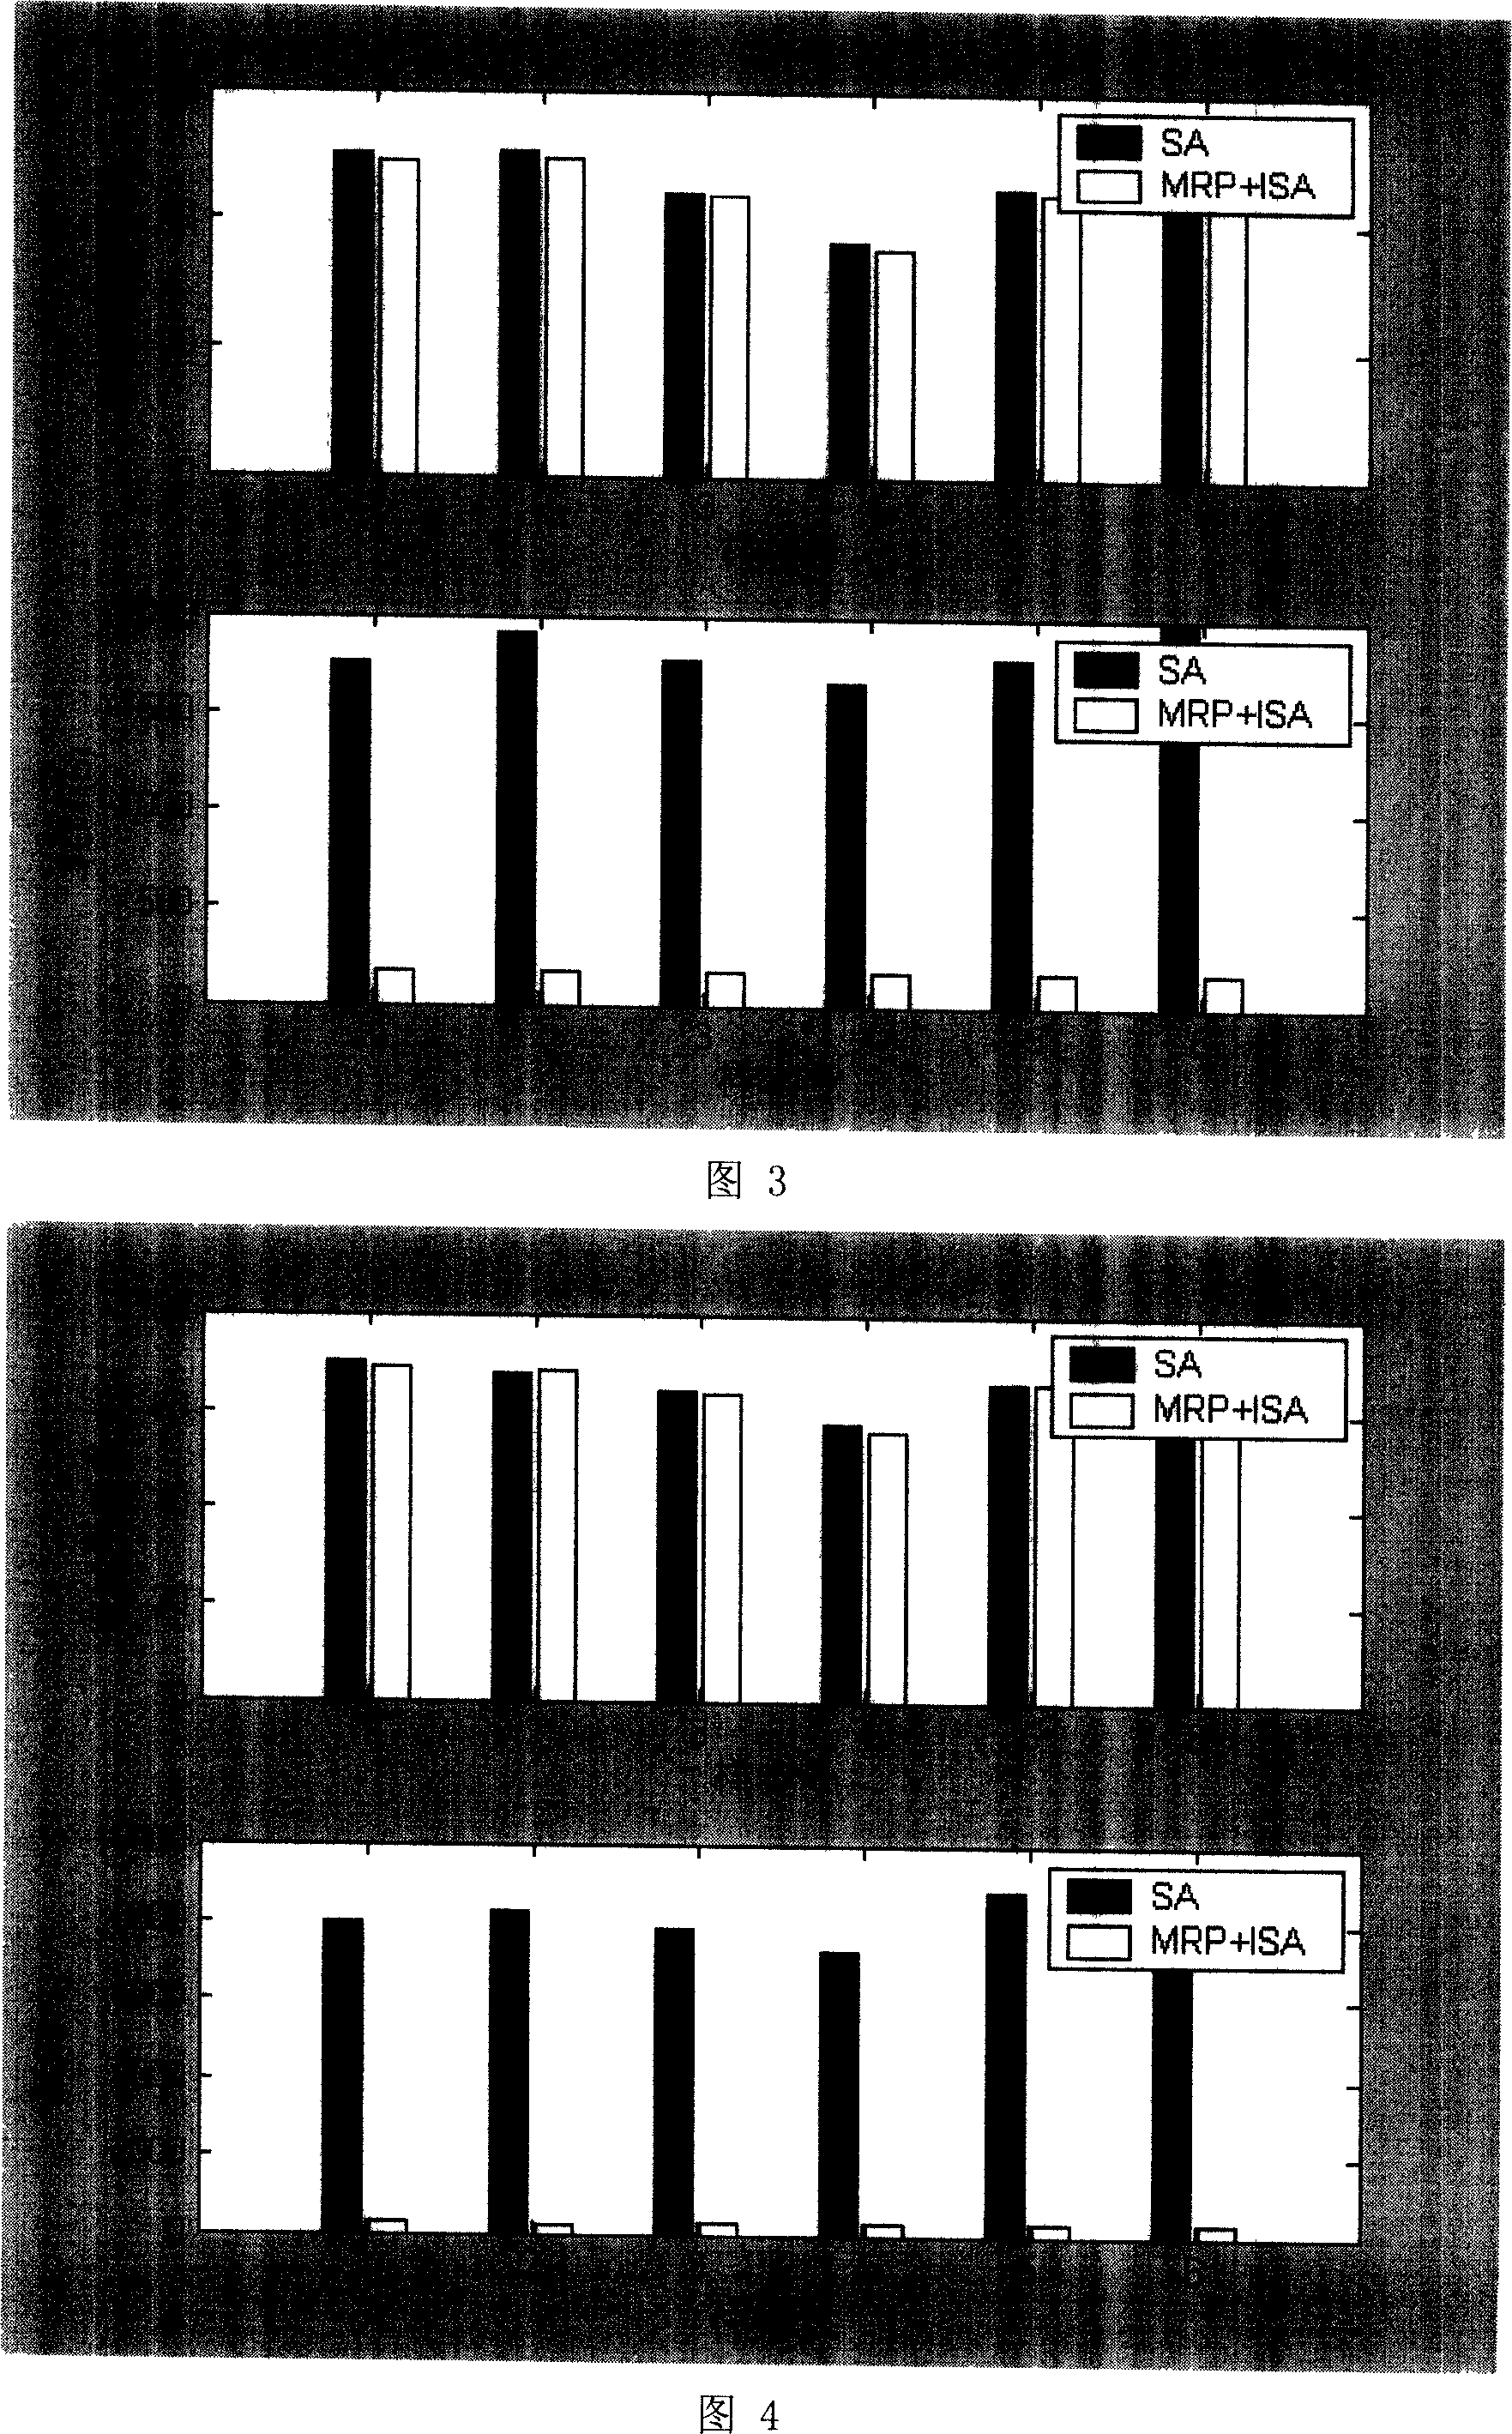 Method for setting multiple observation points based on multi-resolution processing